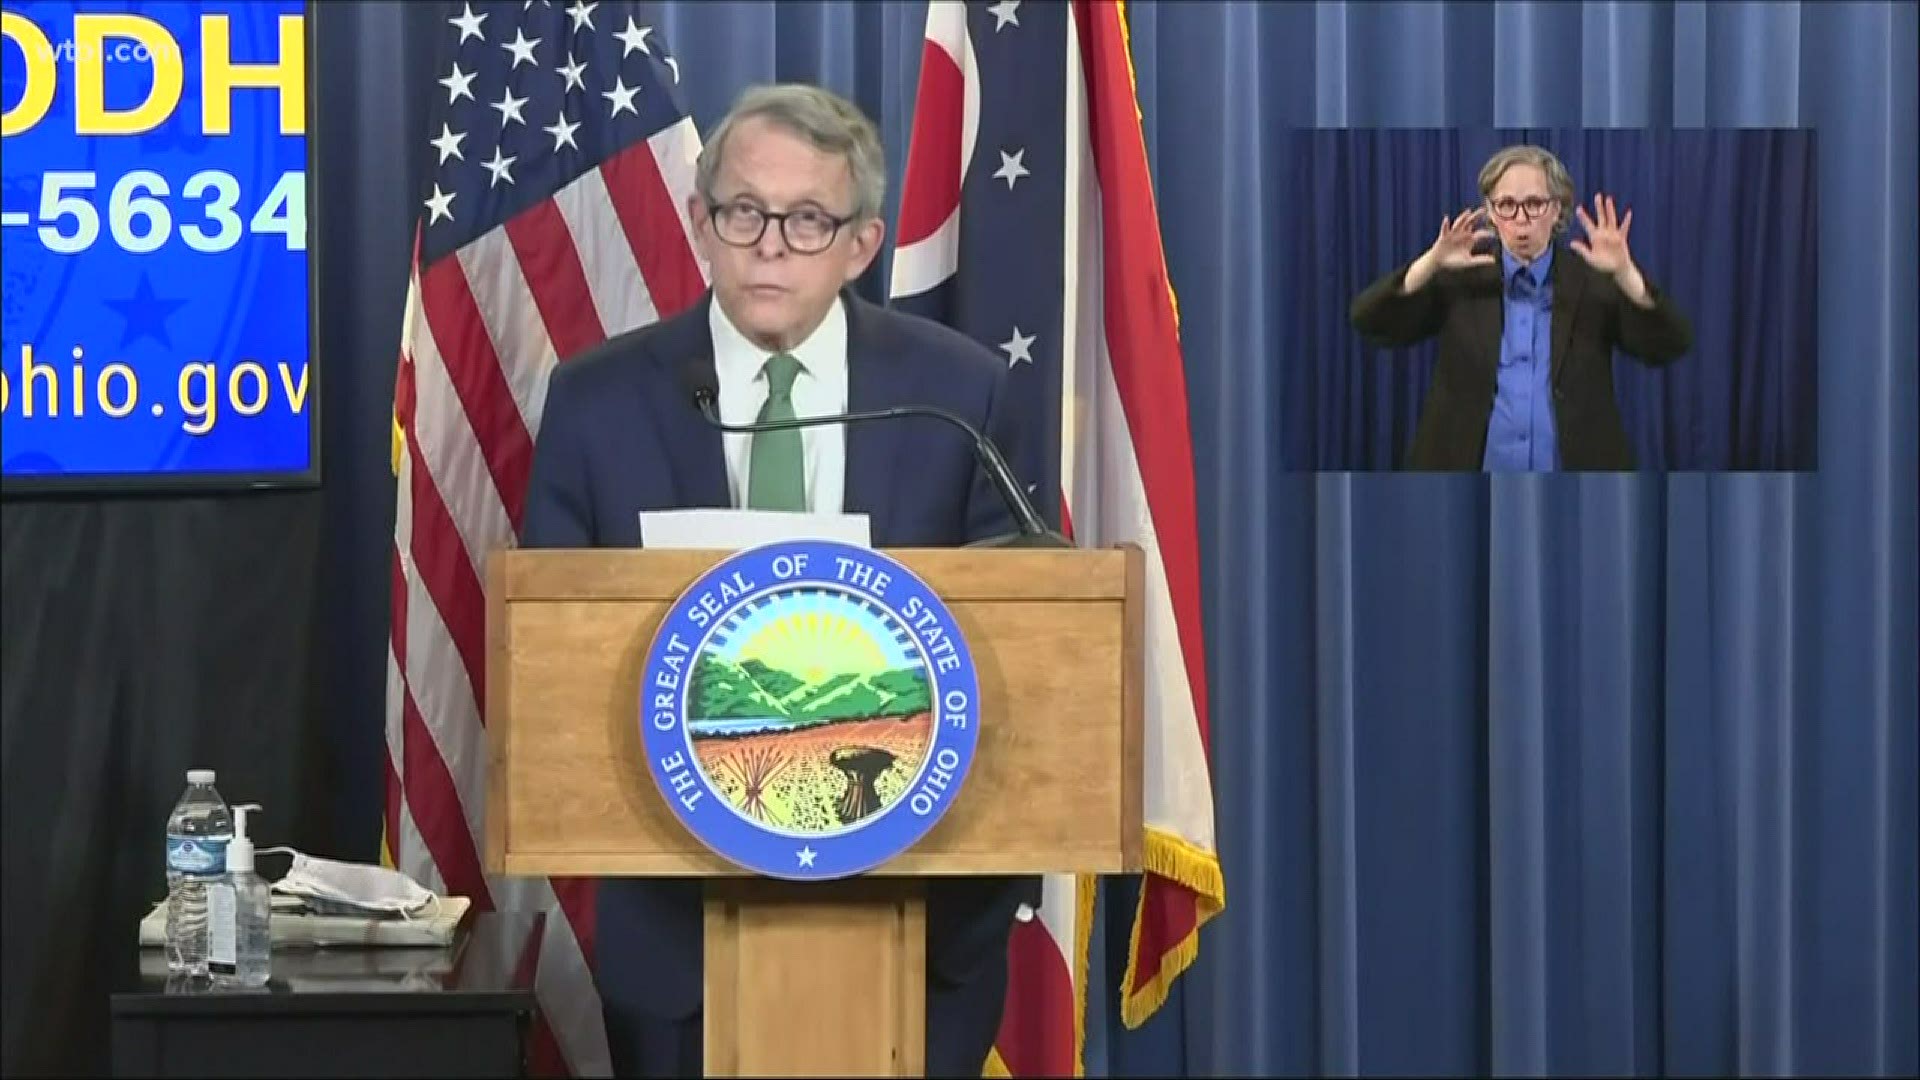 Gov. DeWine announces $775 million budget reduction in General Revenue Fund spending for the remainder of Fiscal Year 2020.